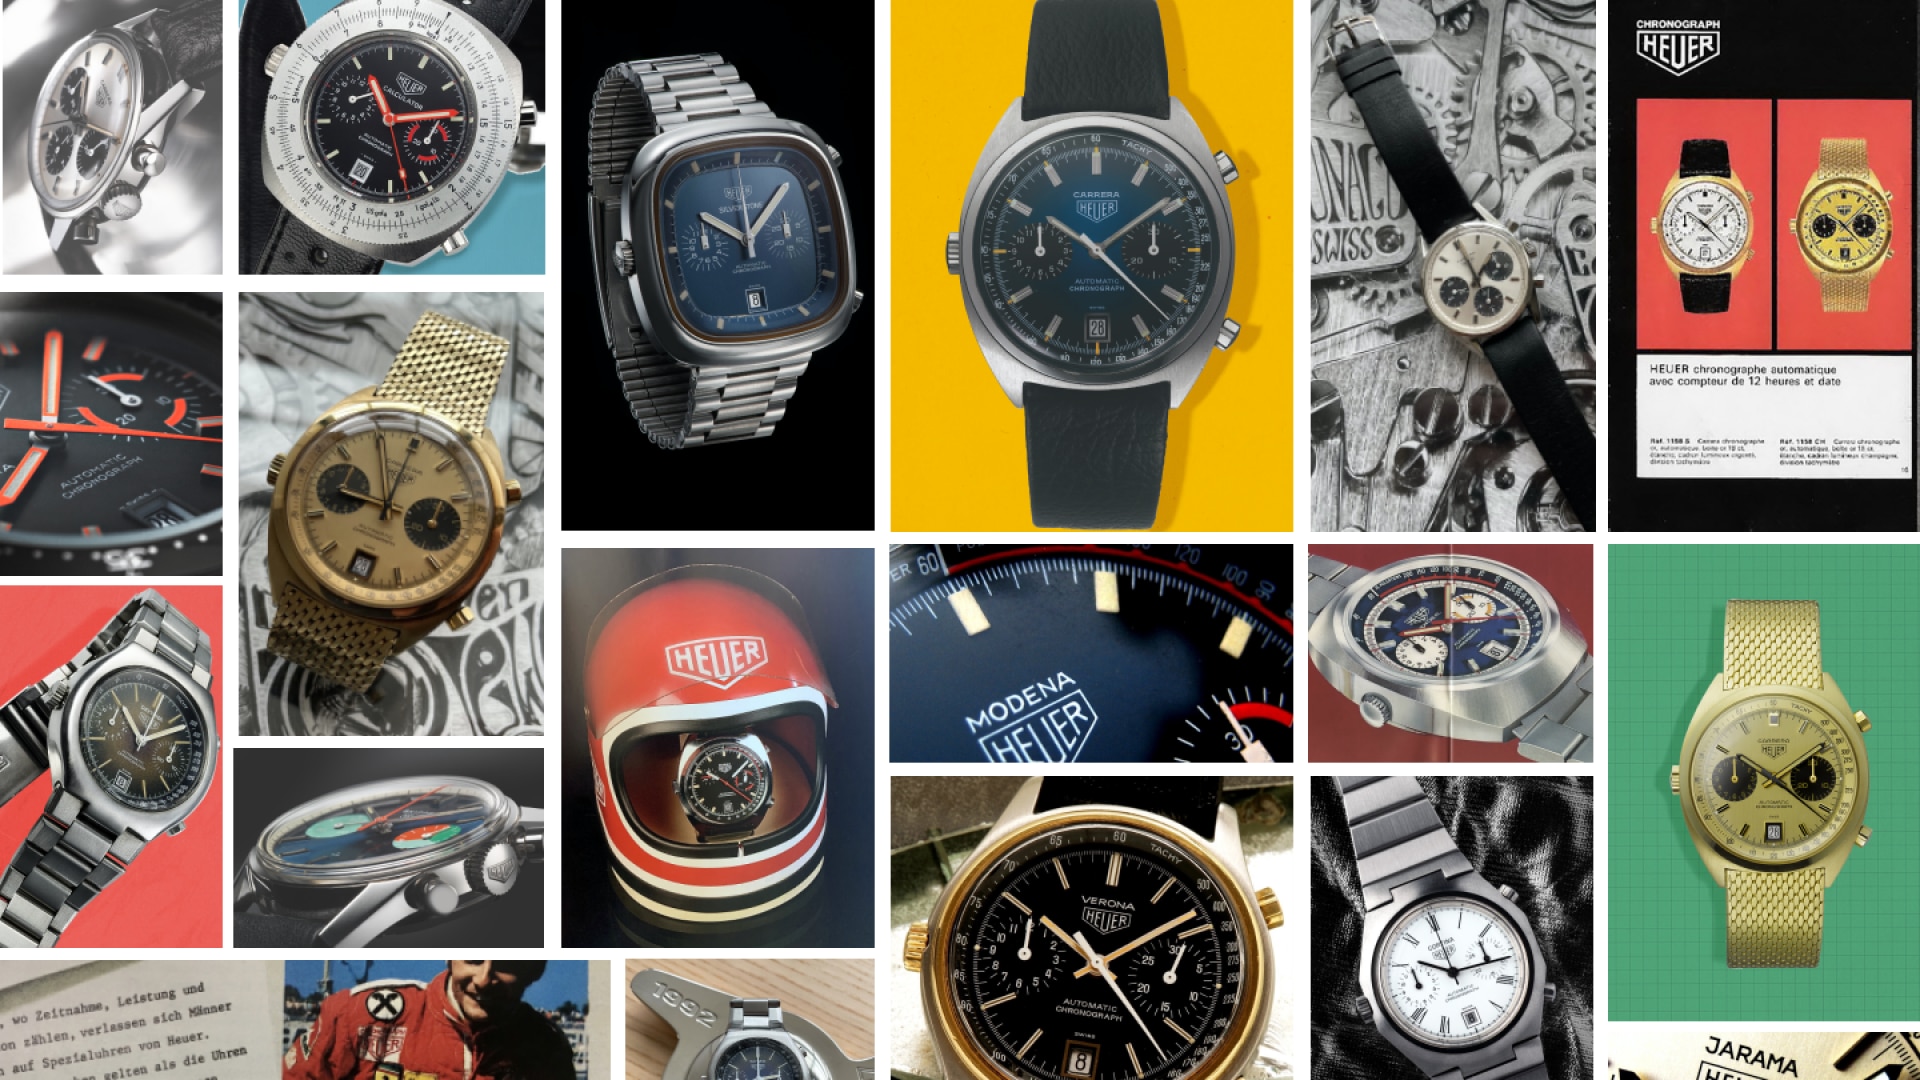 In love with a vintage TAG Heuer Monaco? Meet the classic watch